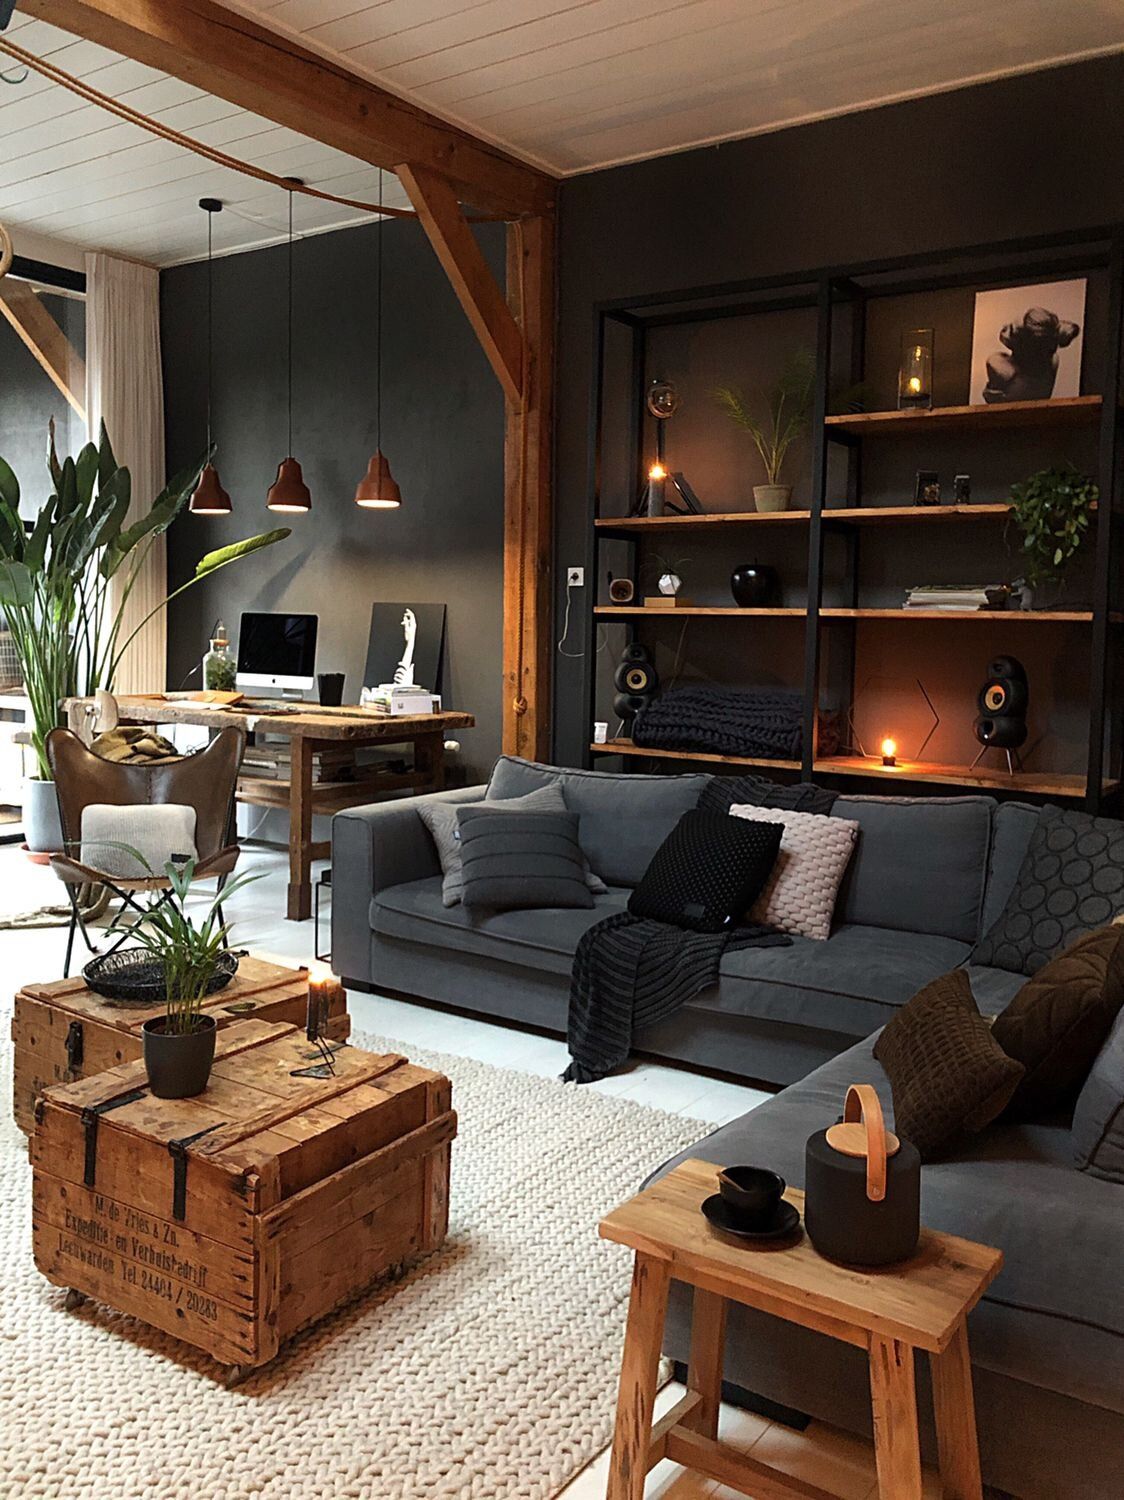 Incorporating Black Furniture into Your
Home Decor